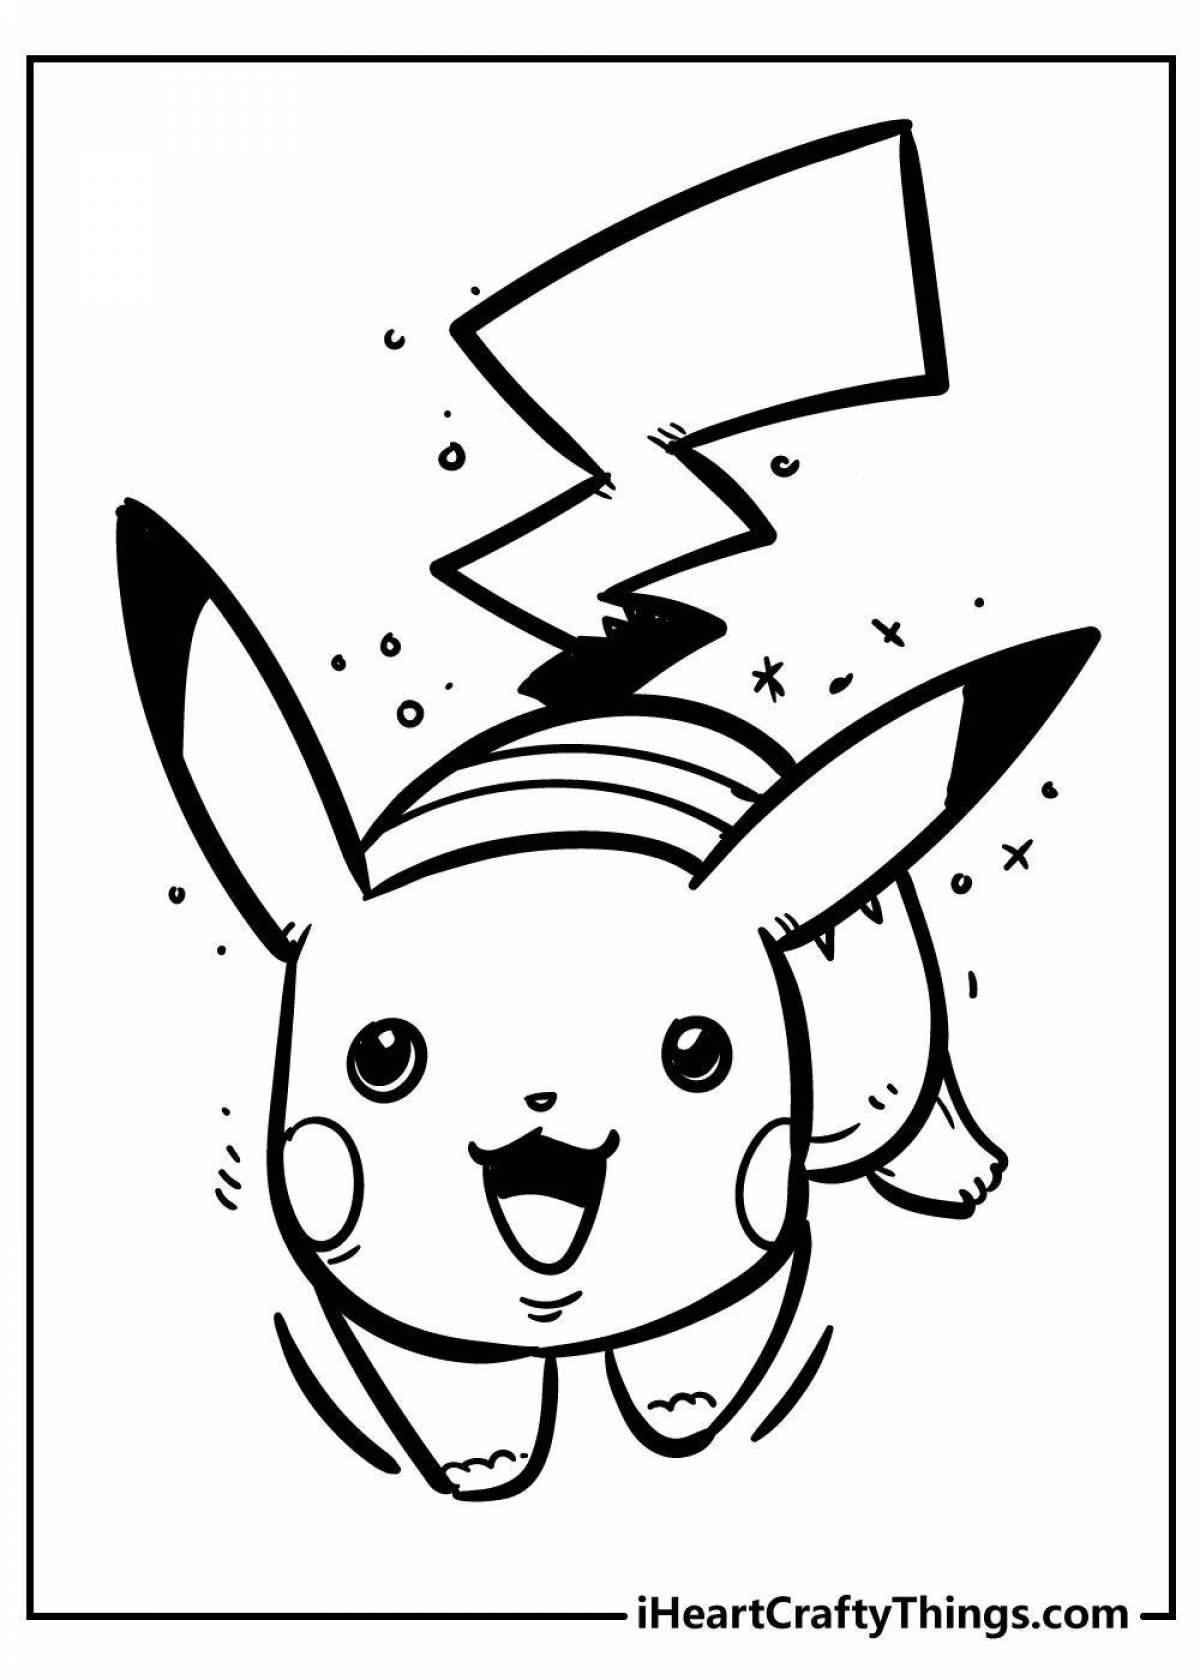 Coloring book shining pikachu with a heart